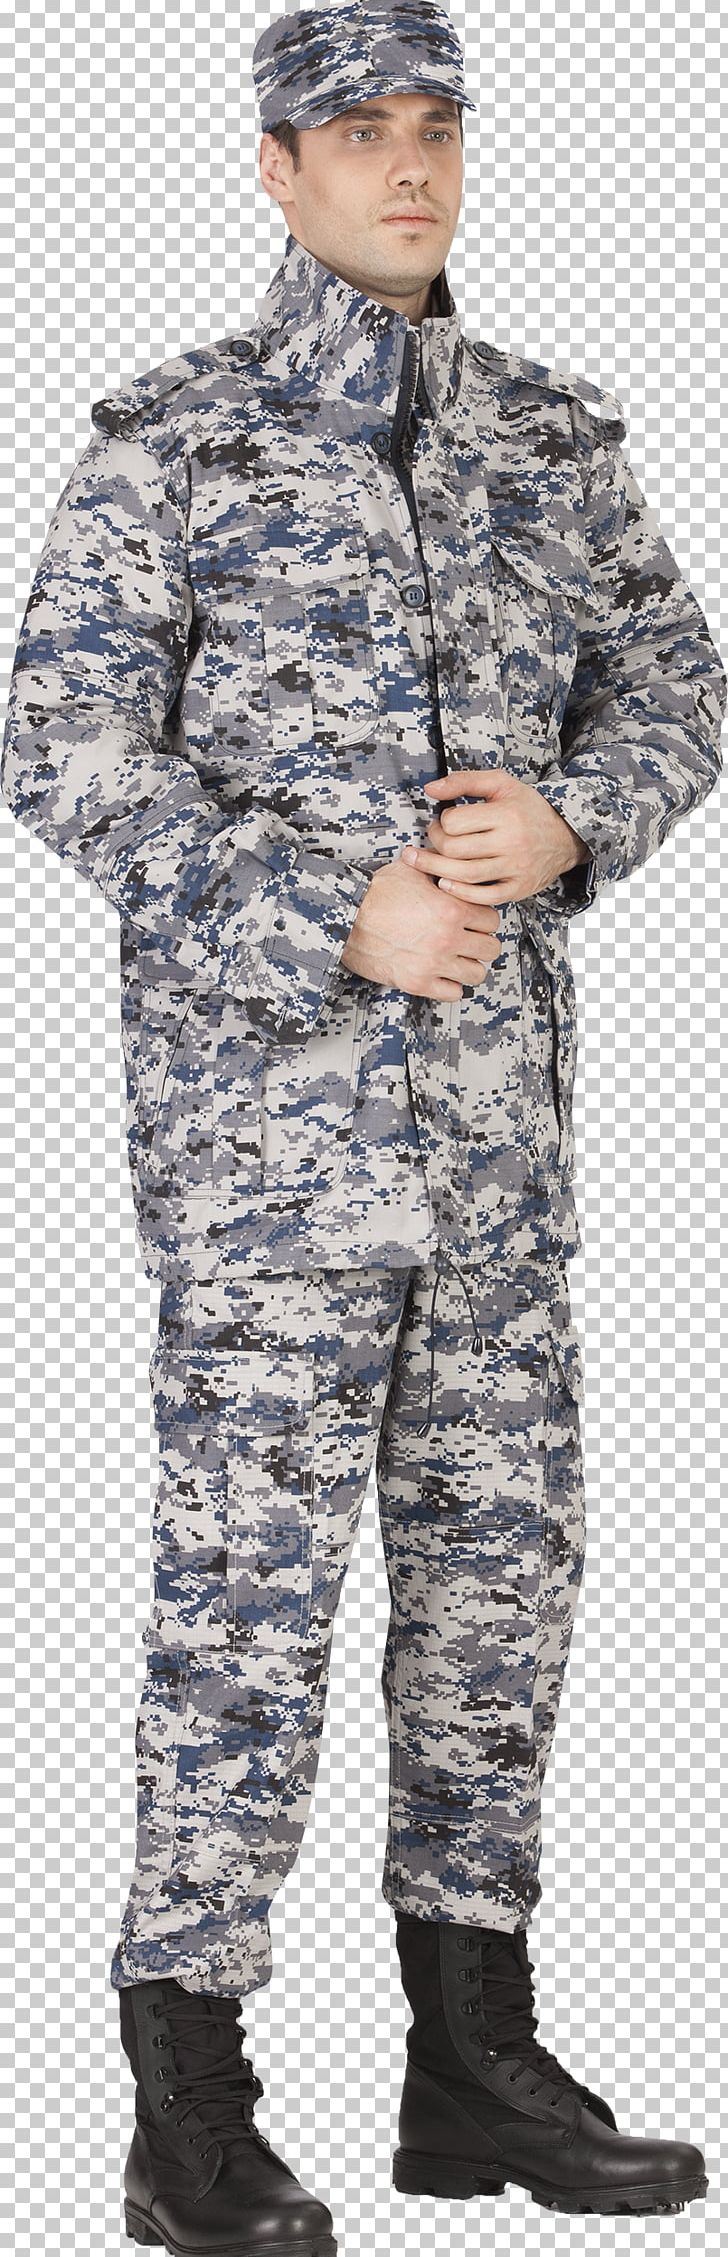 Military Camouflage Soldier Army PNG, Clipart, Army, Asker, Camouflage, Clothing, Firefighter Free PNG Download